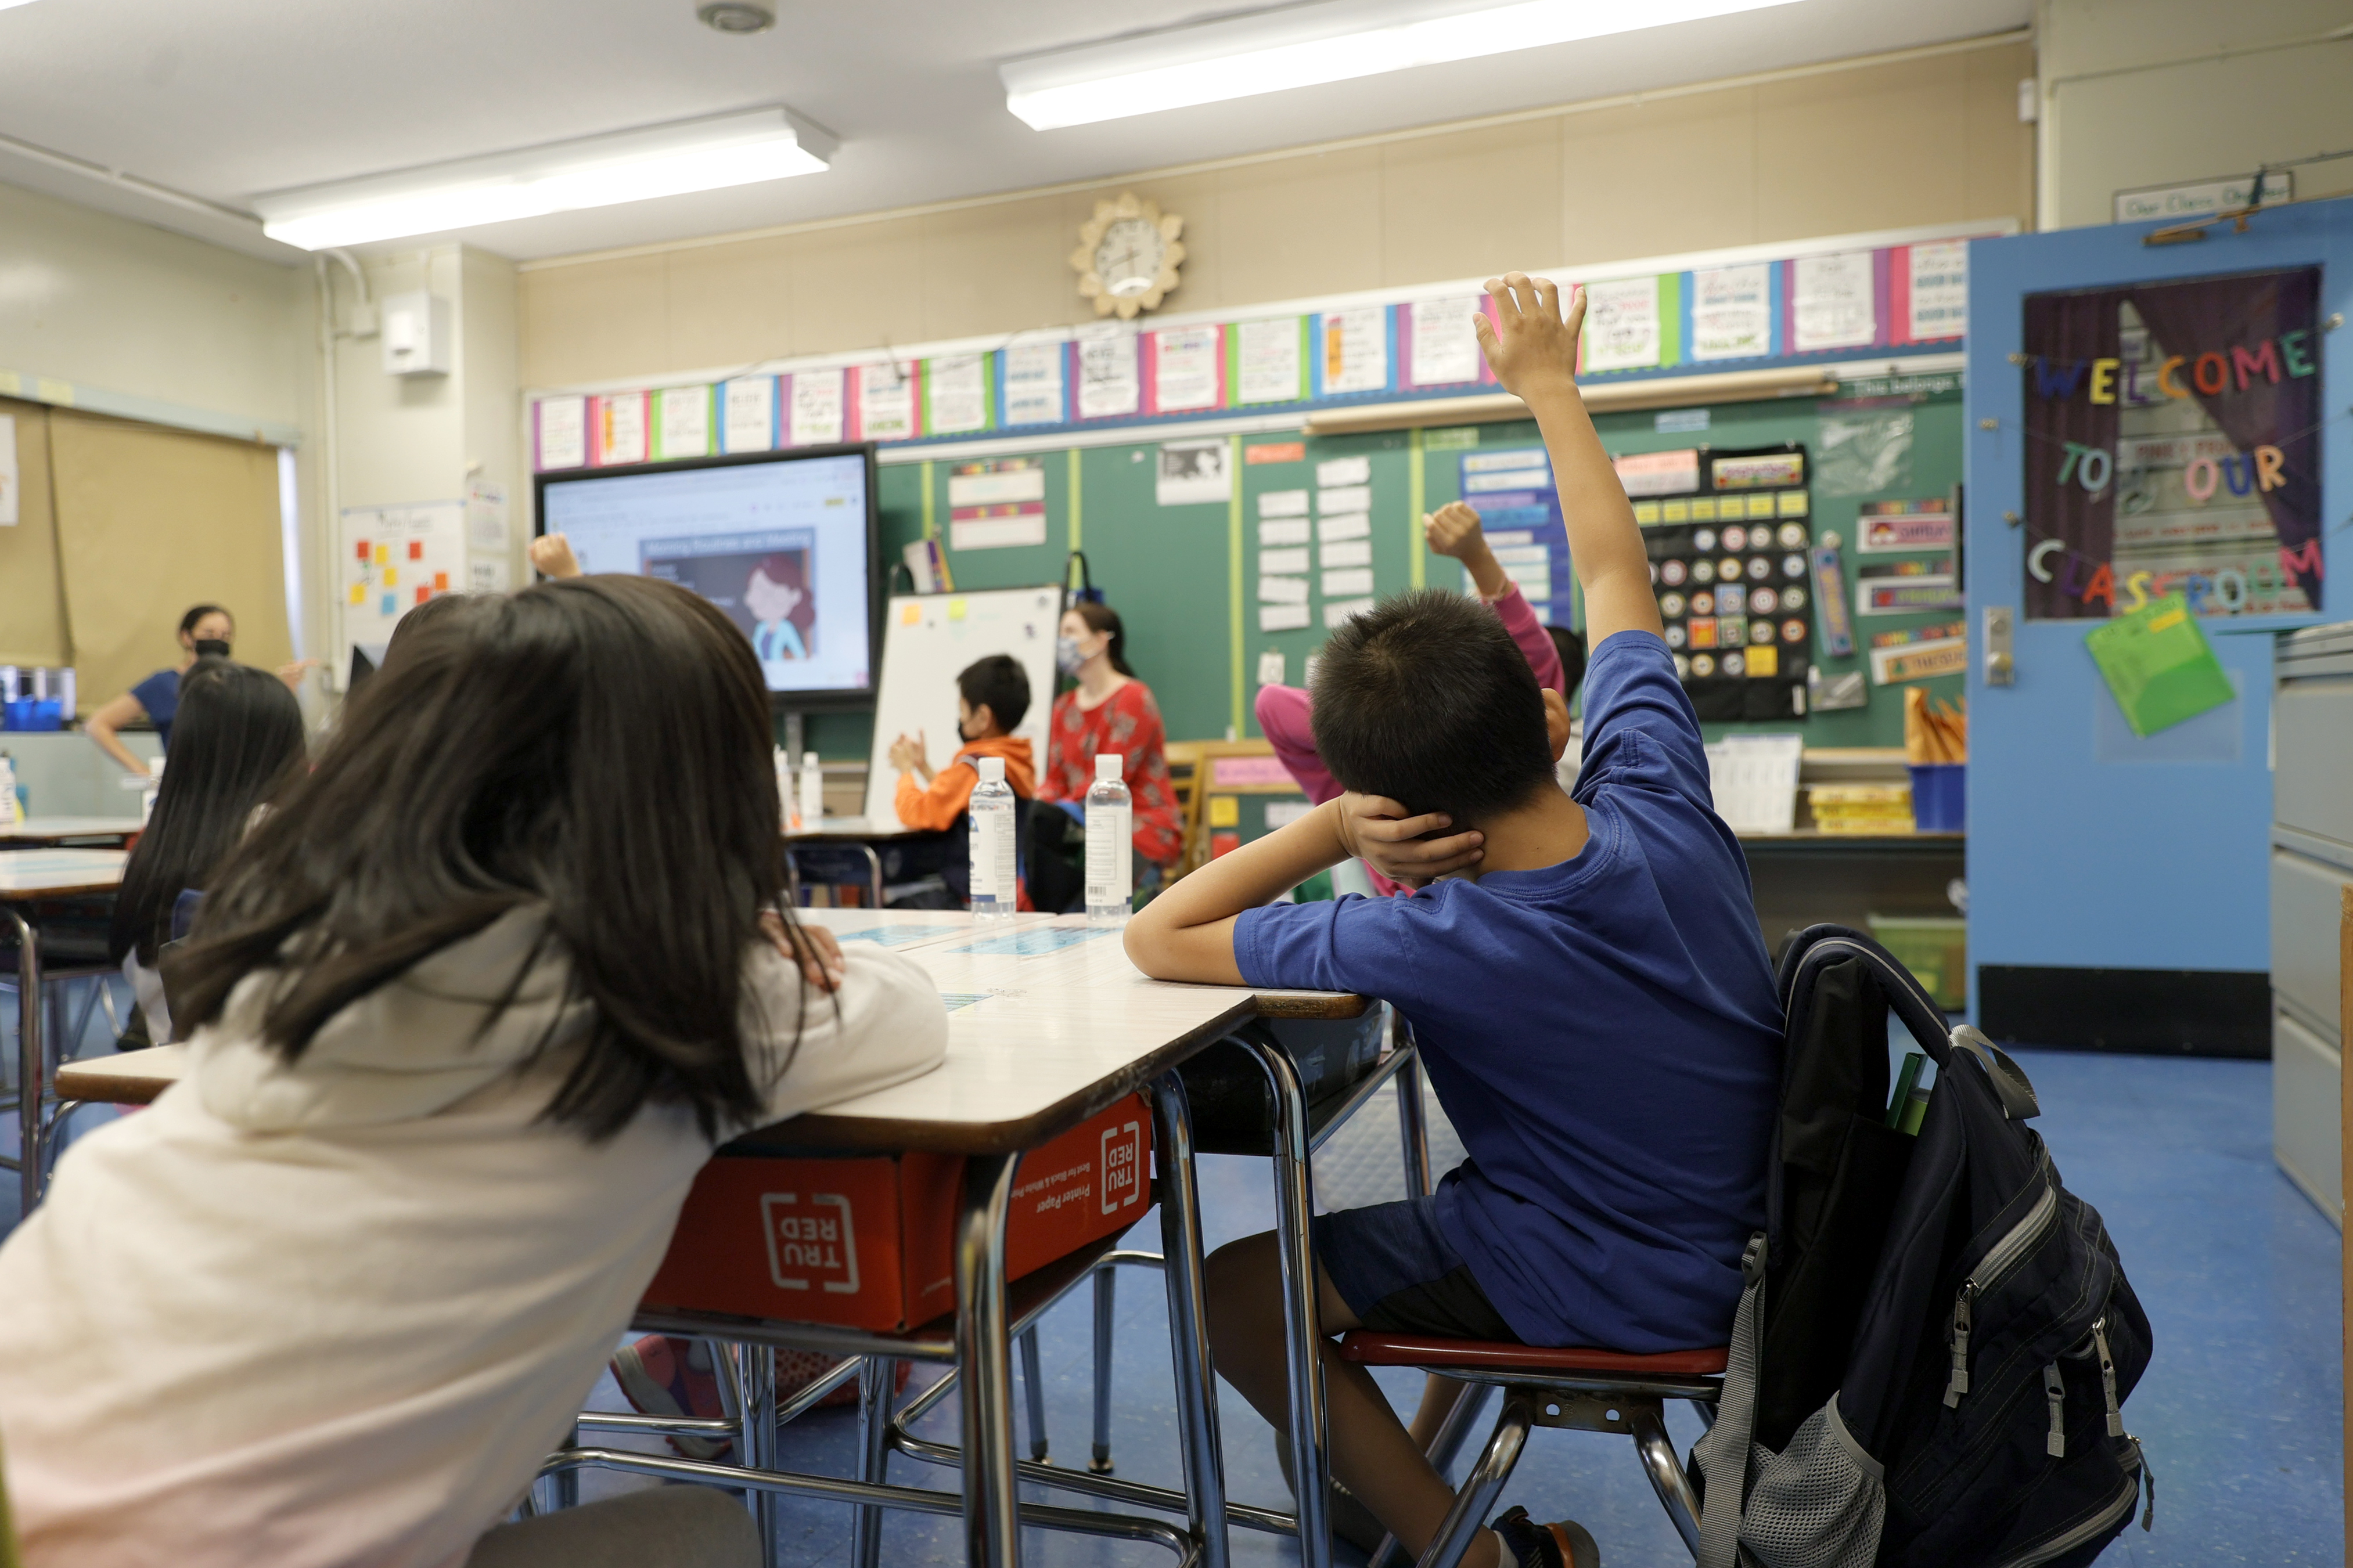 A stock photo of kids in a classroom.